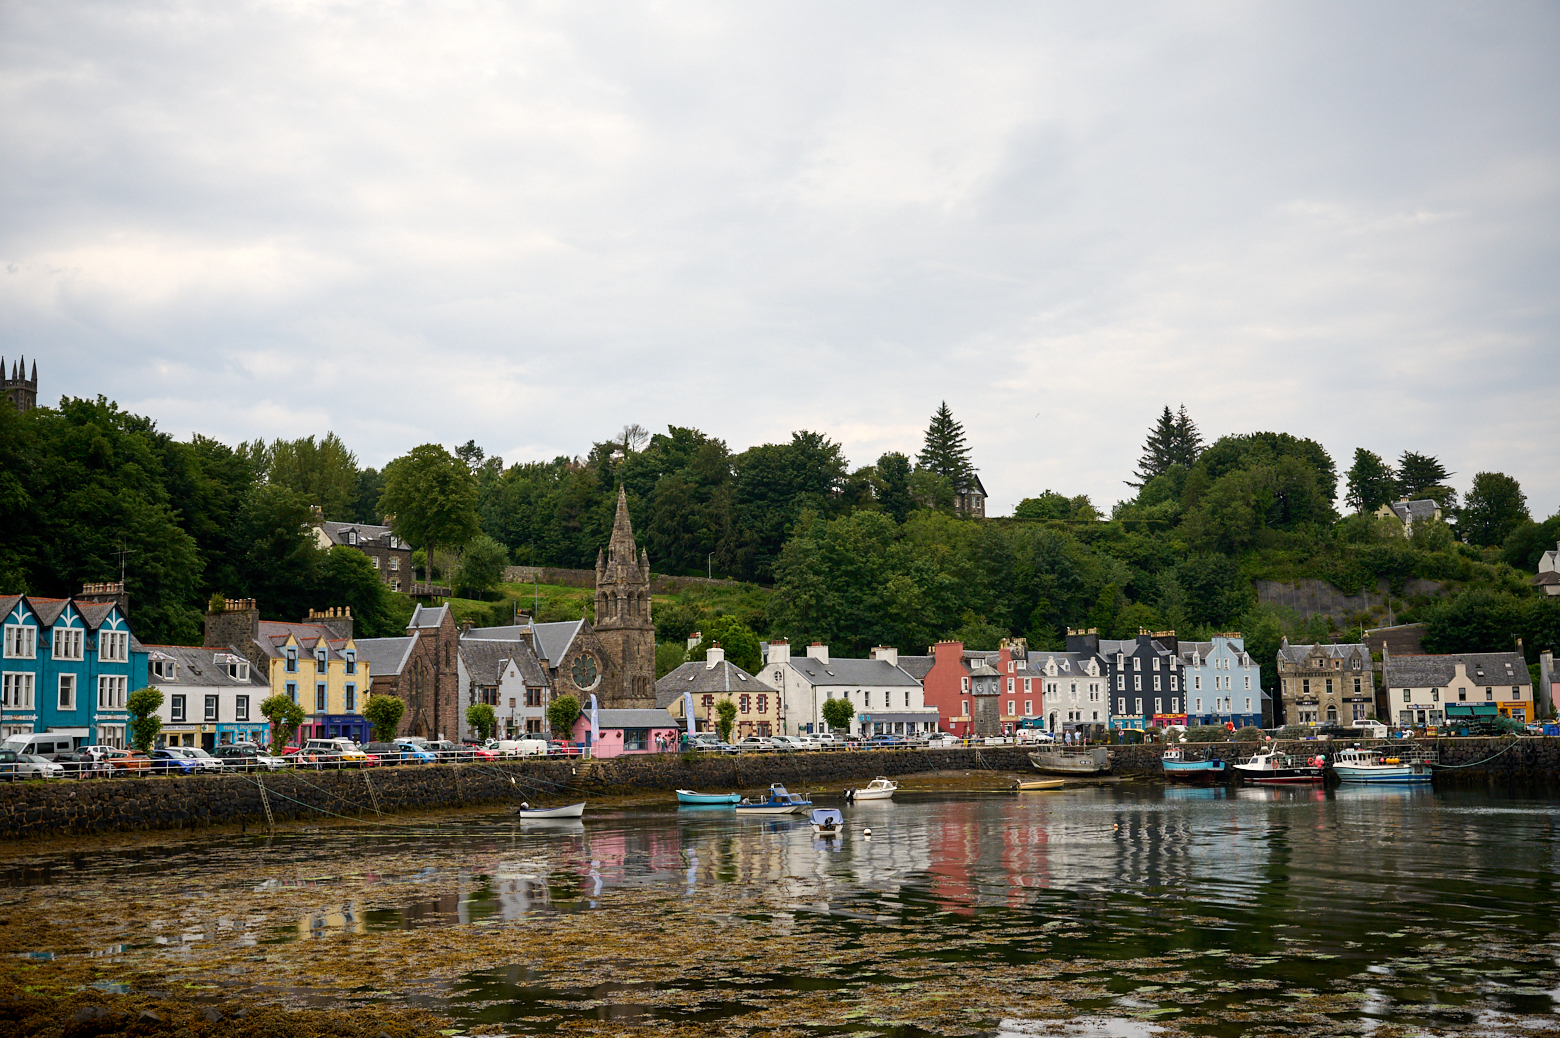 Exploring the Main Street in Tobermory, Isle of Mull. 